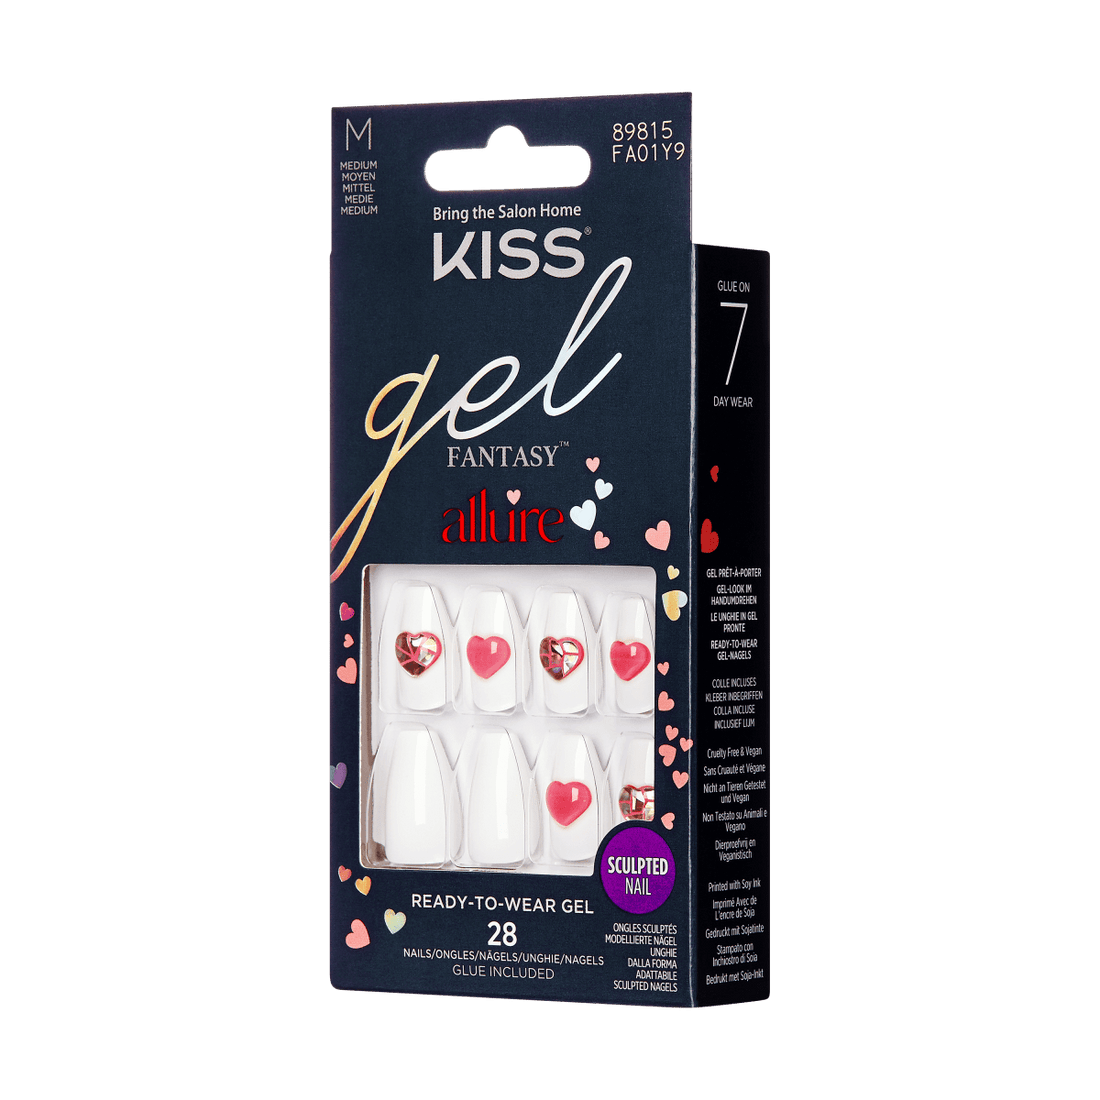 KISS Gel Fantasy, Press-On Nails, Be My Angel, White, Med Coffin, 28ct